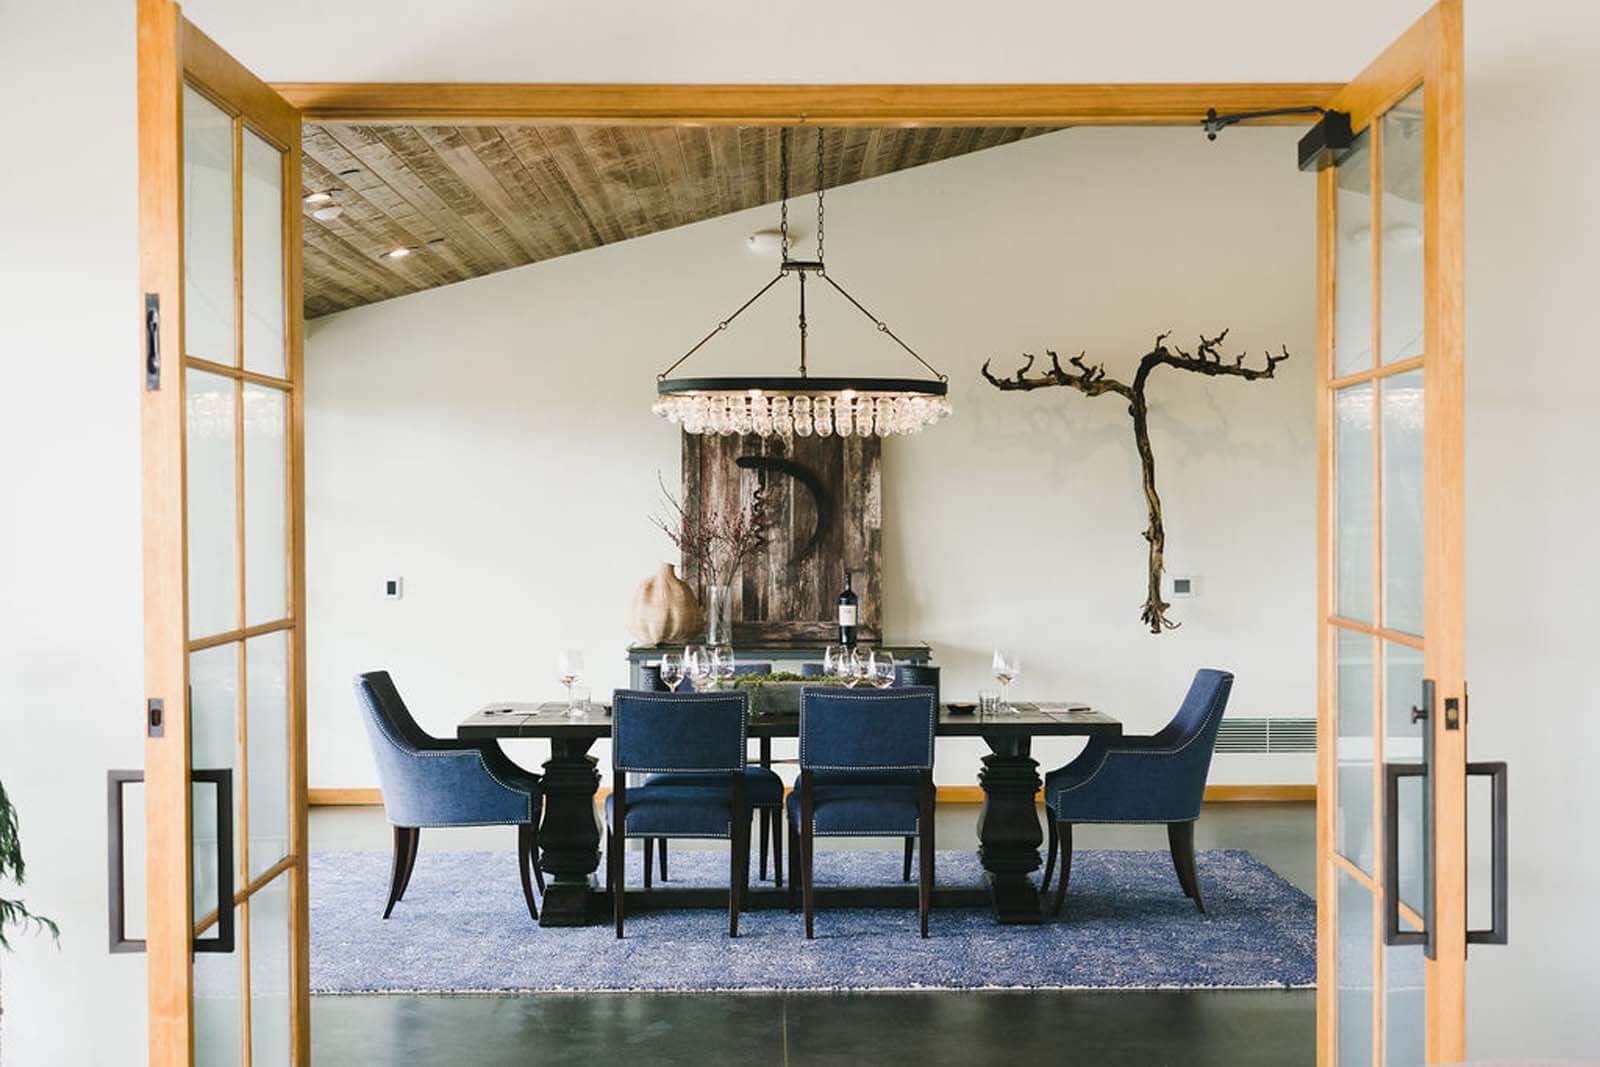 a dining table at a winery with a modern bulb chandelier, branch wall hanging